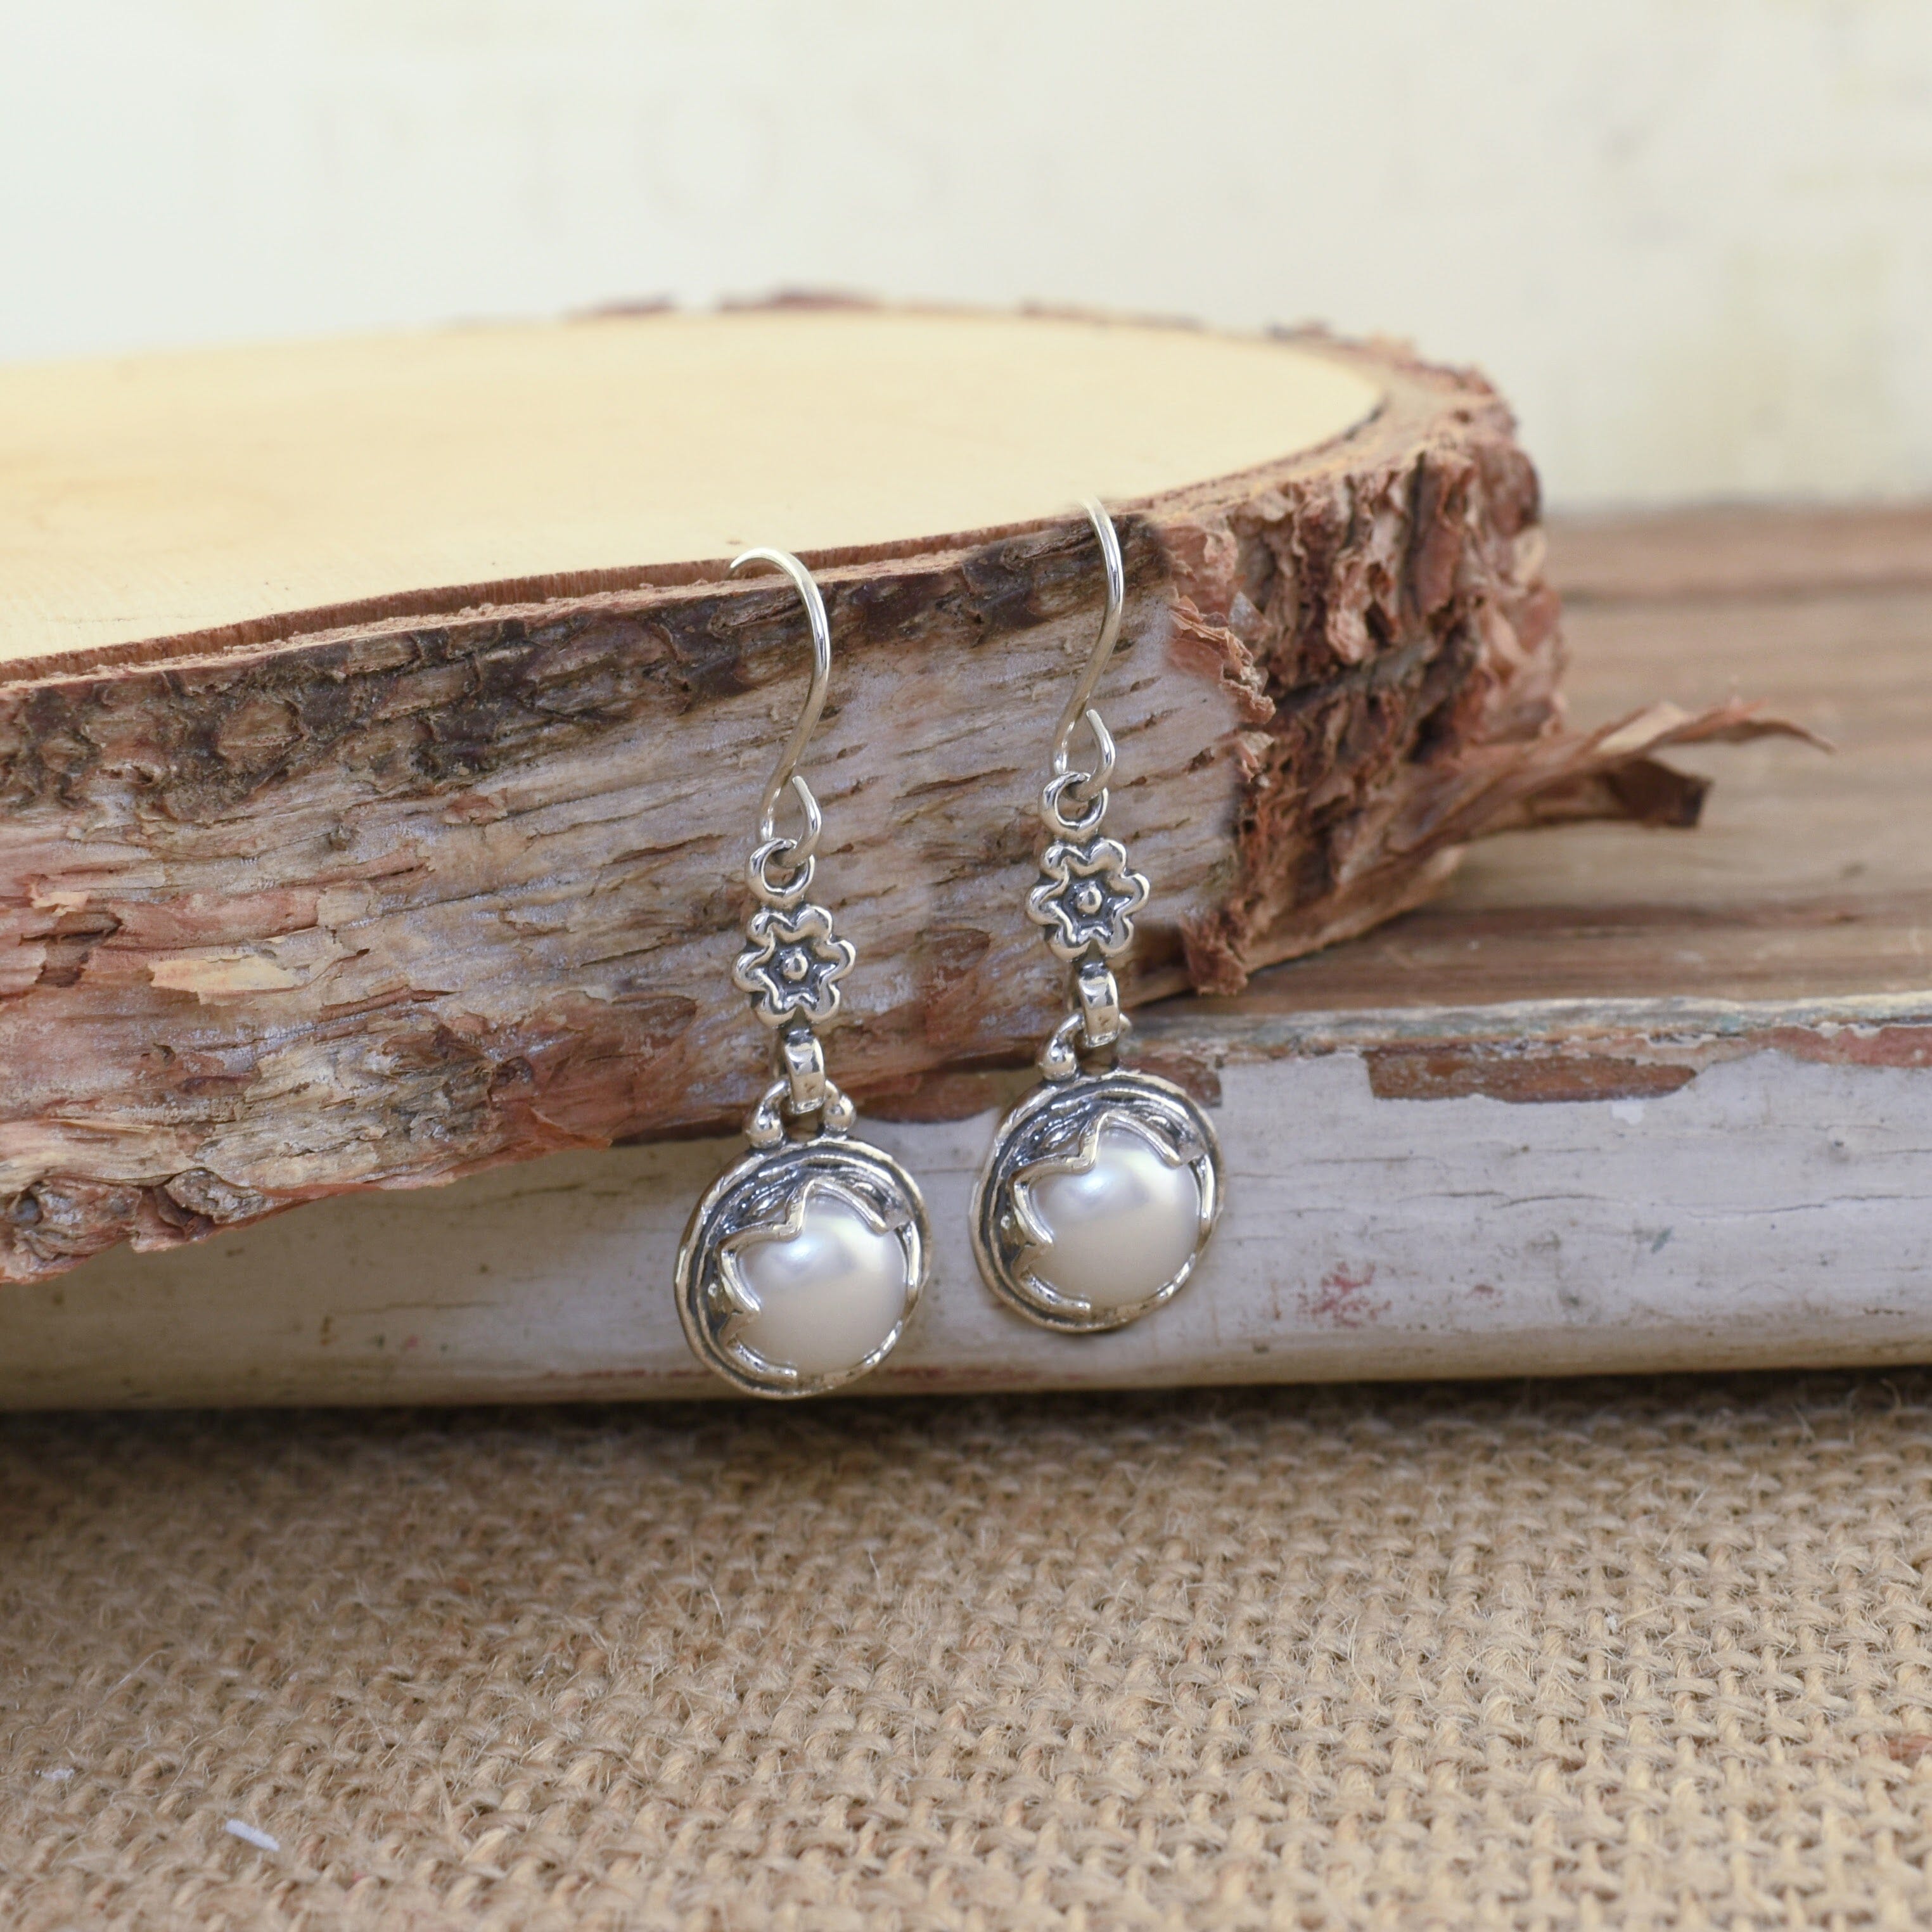 Sterling silver and white freshwater pearl earrings with tiny flower accent